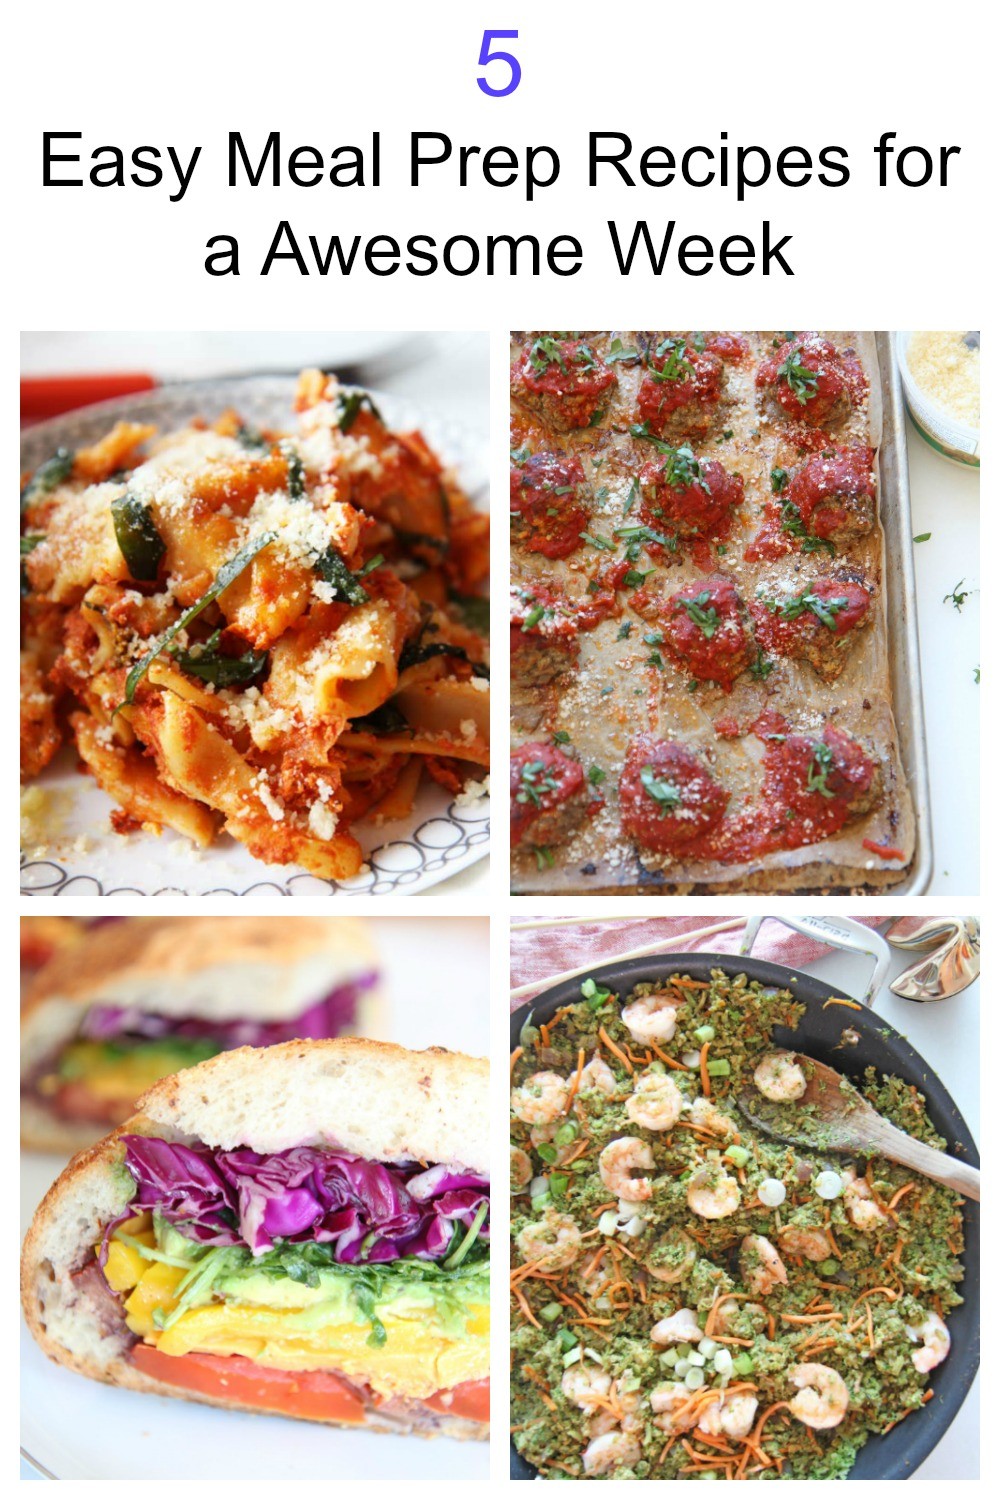 5 Awesome Recipes For Meal PrepNothing better then meal prep to make your week much less crazy. Prep, smile and eat! Lunches include sheet pan meatballs, turmeric lentil soup, a big veggie sandwich and more. Happy cooking!